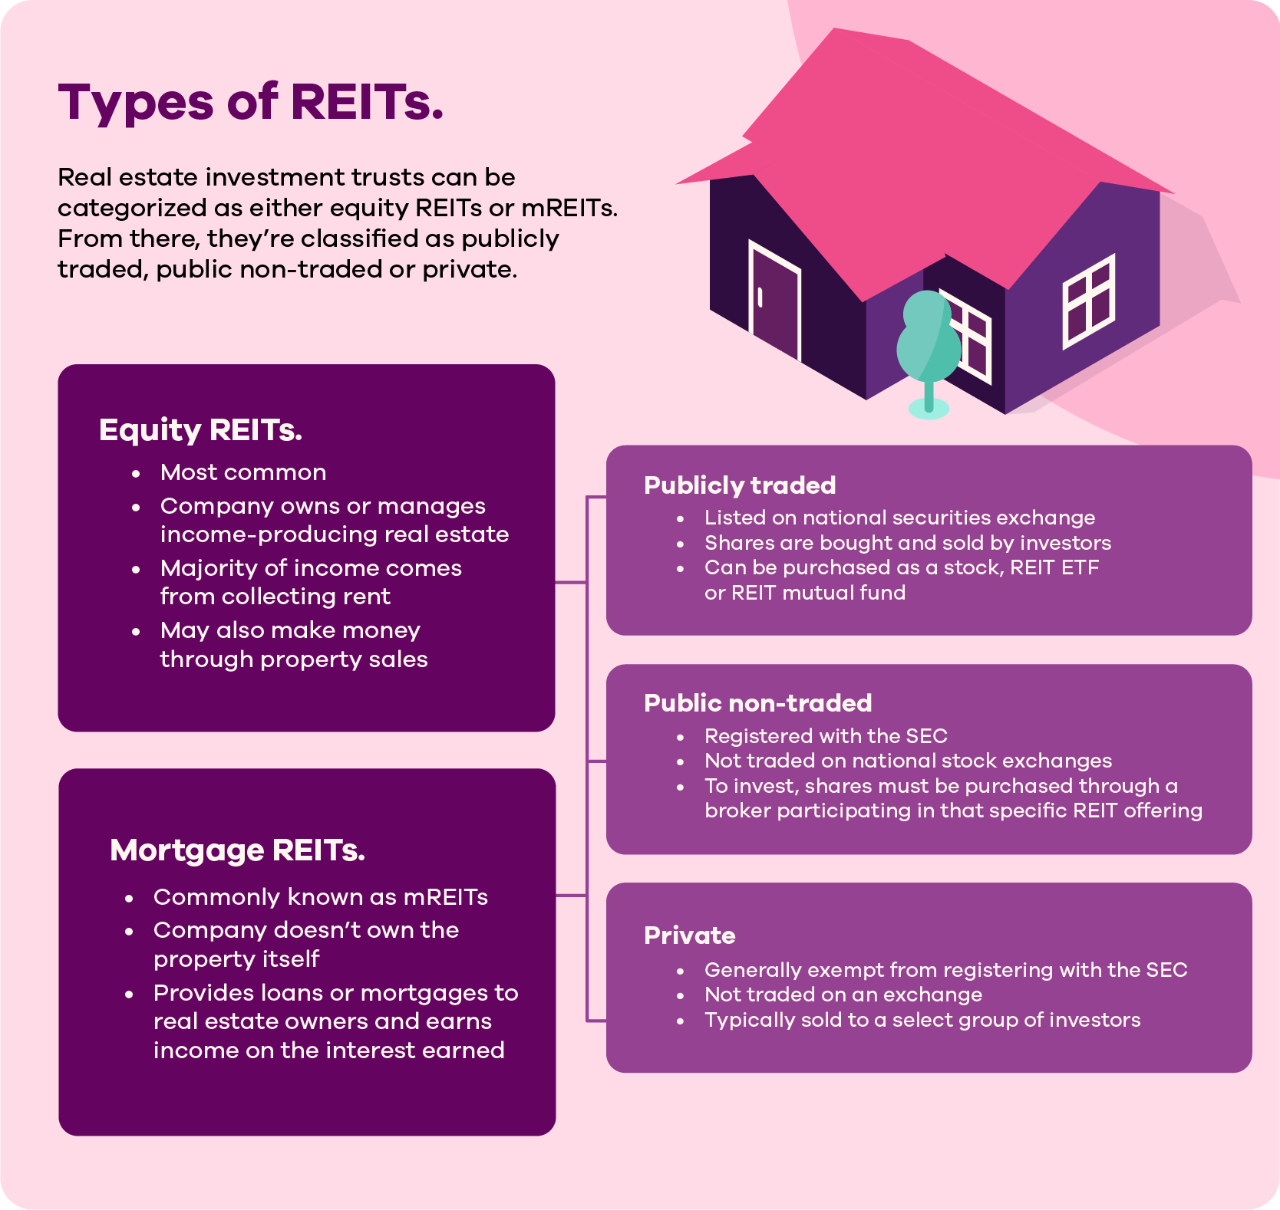 Types of REITs; Real estate investment trusts can be categorized as either equity REITs or mREITs. From there, they’re classified as publicly traded, public non-traded or private. Equity REITs: (most common, company owns or manages income-producing real estate, majority of income comes from collecting rent, may also make money through property sales).  Mortgage REITs: (commonly known as mREITS, company doesn’t own the property itself, provides loans or mortgages to real estate owners and earns income on the interest earned). Publicly traded: (listed on national securities exchange, shares are bought and sold by investors, can be purchased as a stock, REIT ETF or REIT mutual fund).  Public non-traded: (registered with the SEC, not traded on national stock exchanges, to invest, shares must be purchased through a broker participating in that specific REIT offering). Private: (generally exempt from registering with the SEC, not traded on an exchange, typically sold to a select group of investors).